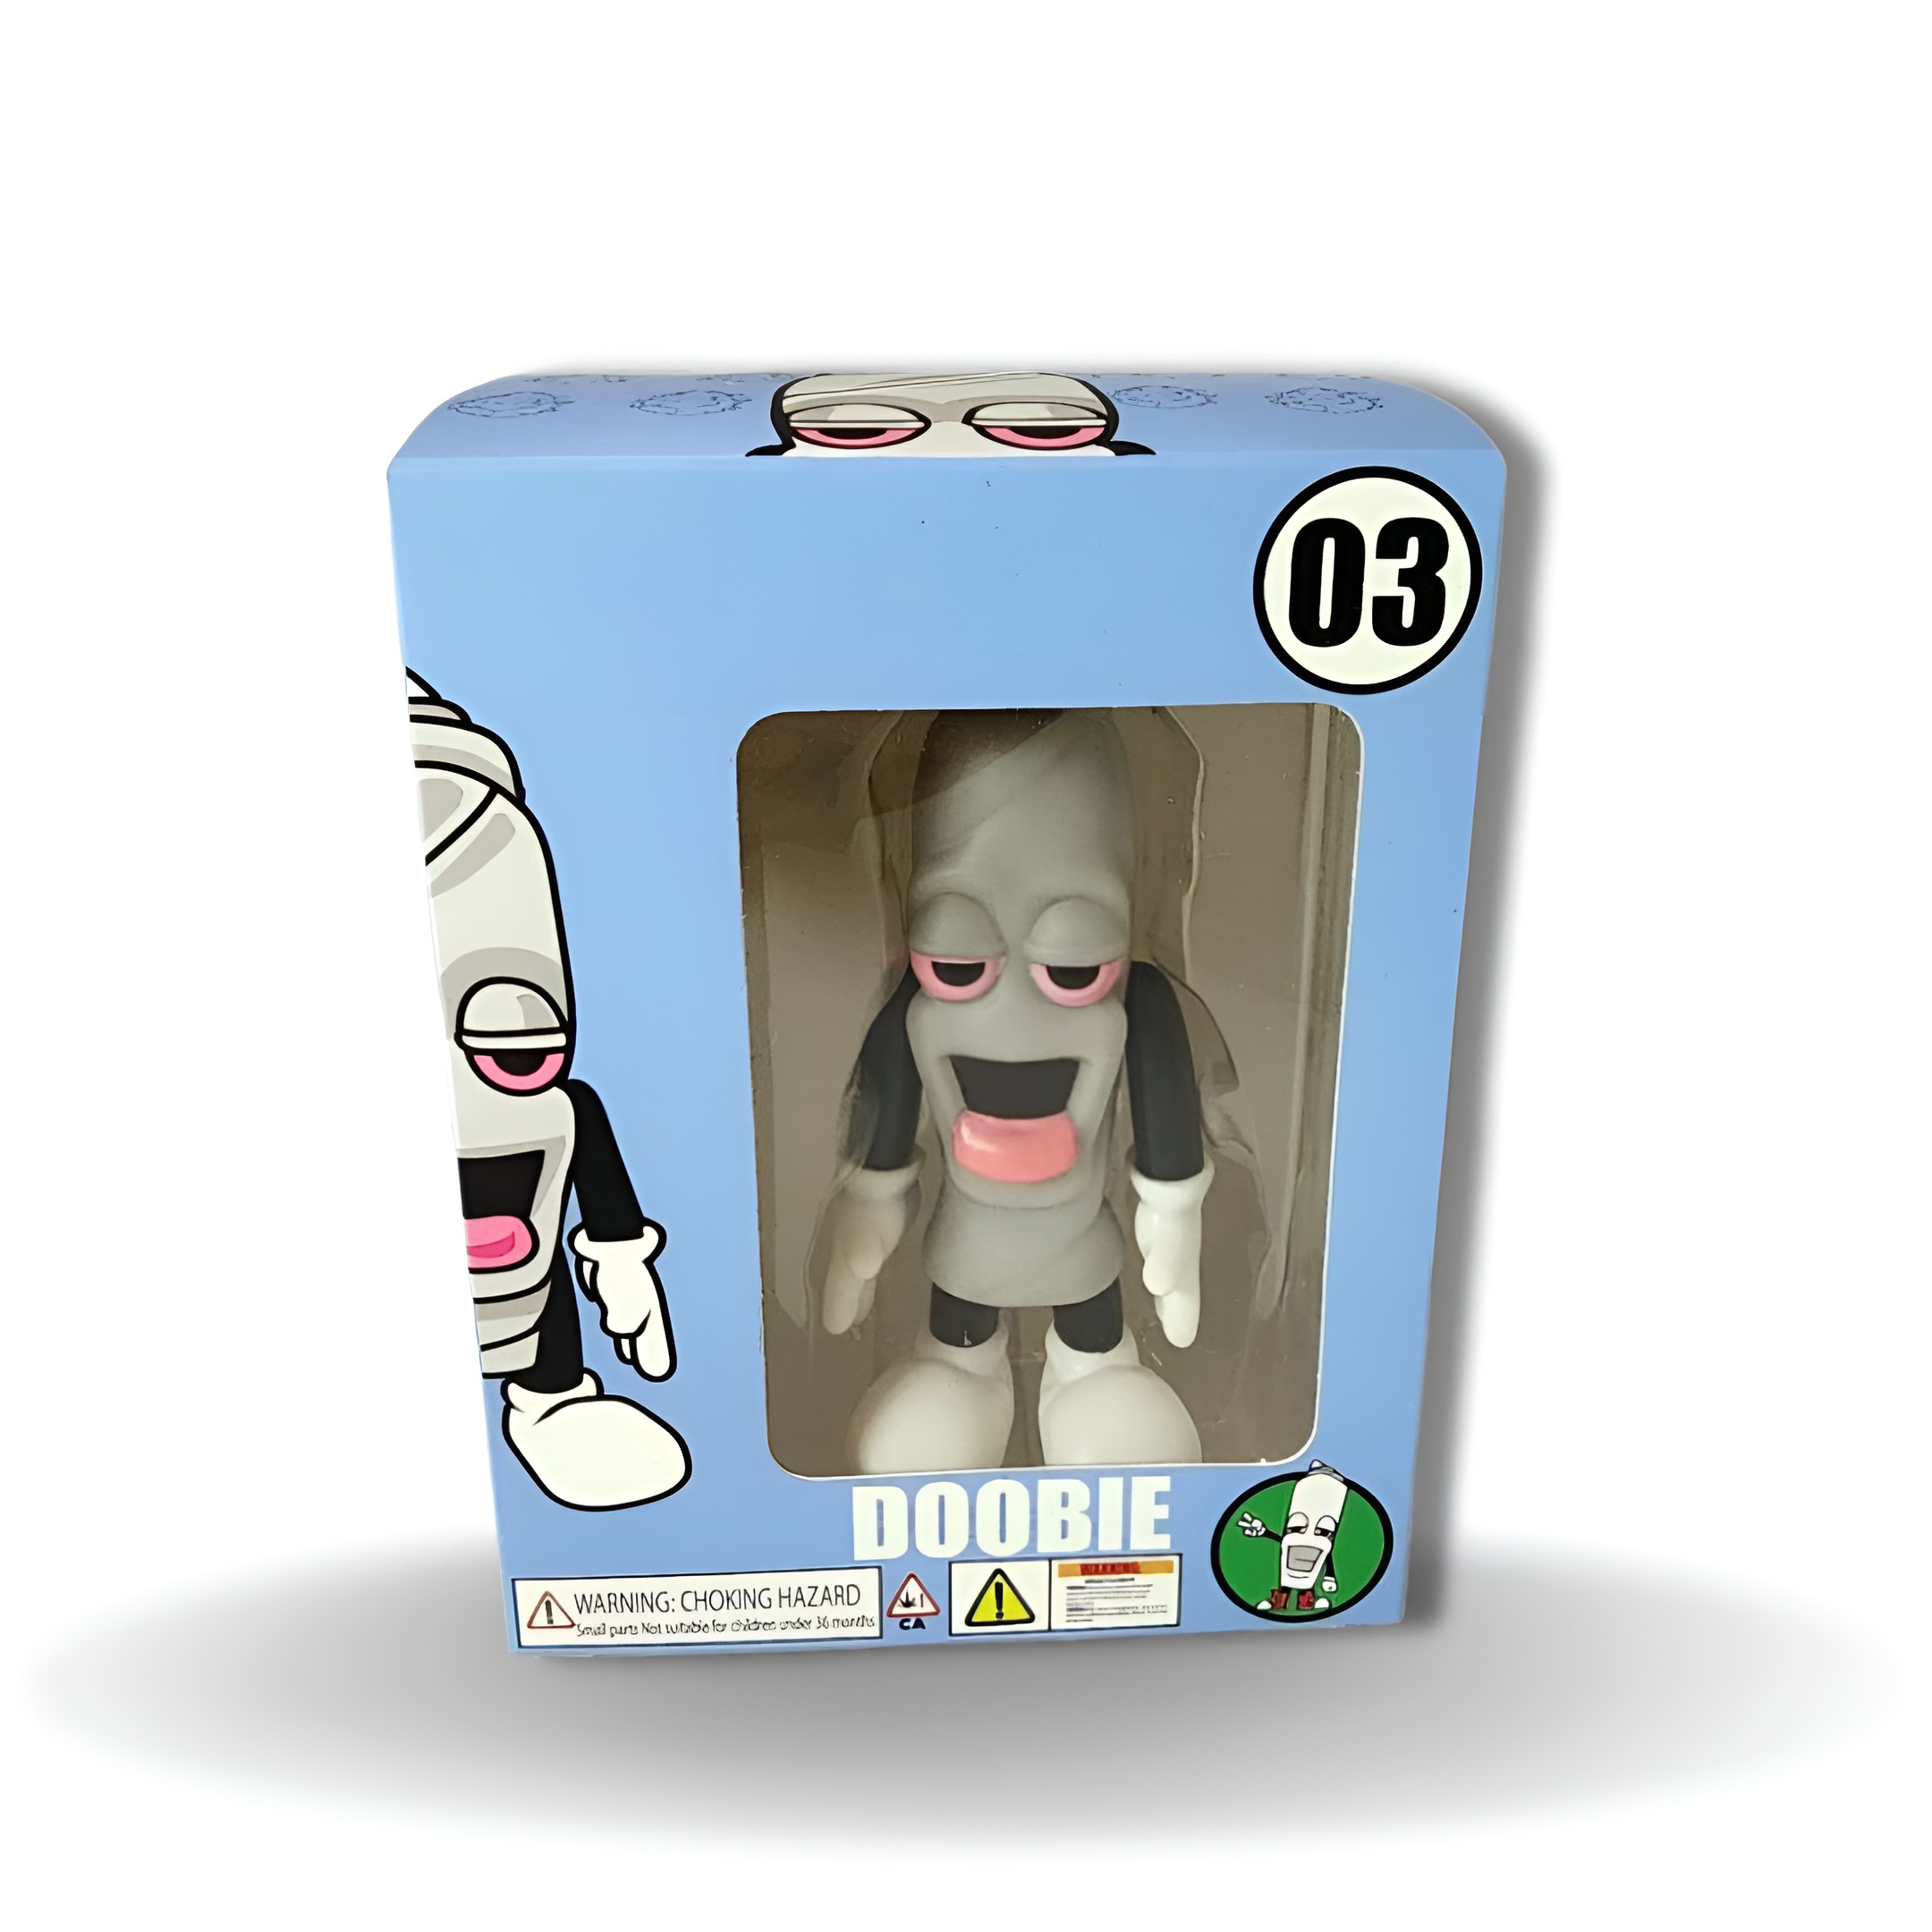 Doobie Limited Edition Collectible 1 of 500, 4-inch hand-painted figures, with first edition collectible box